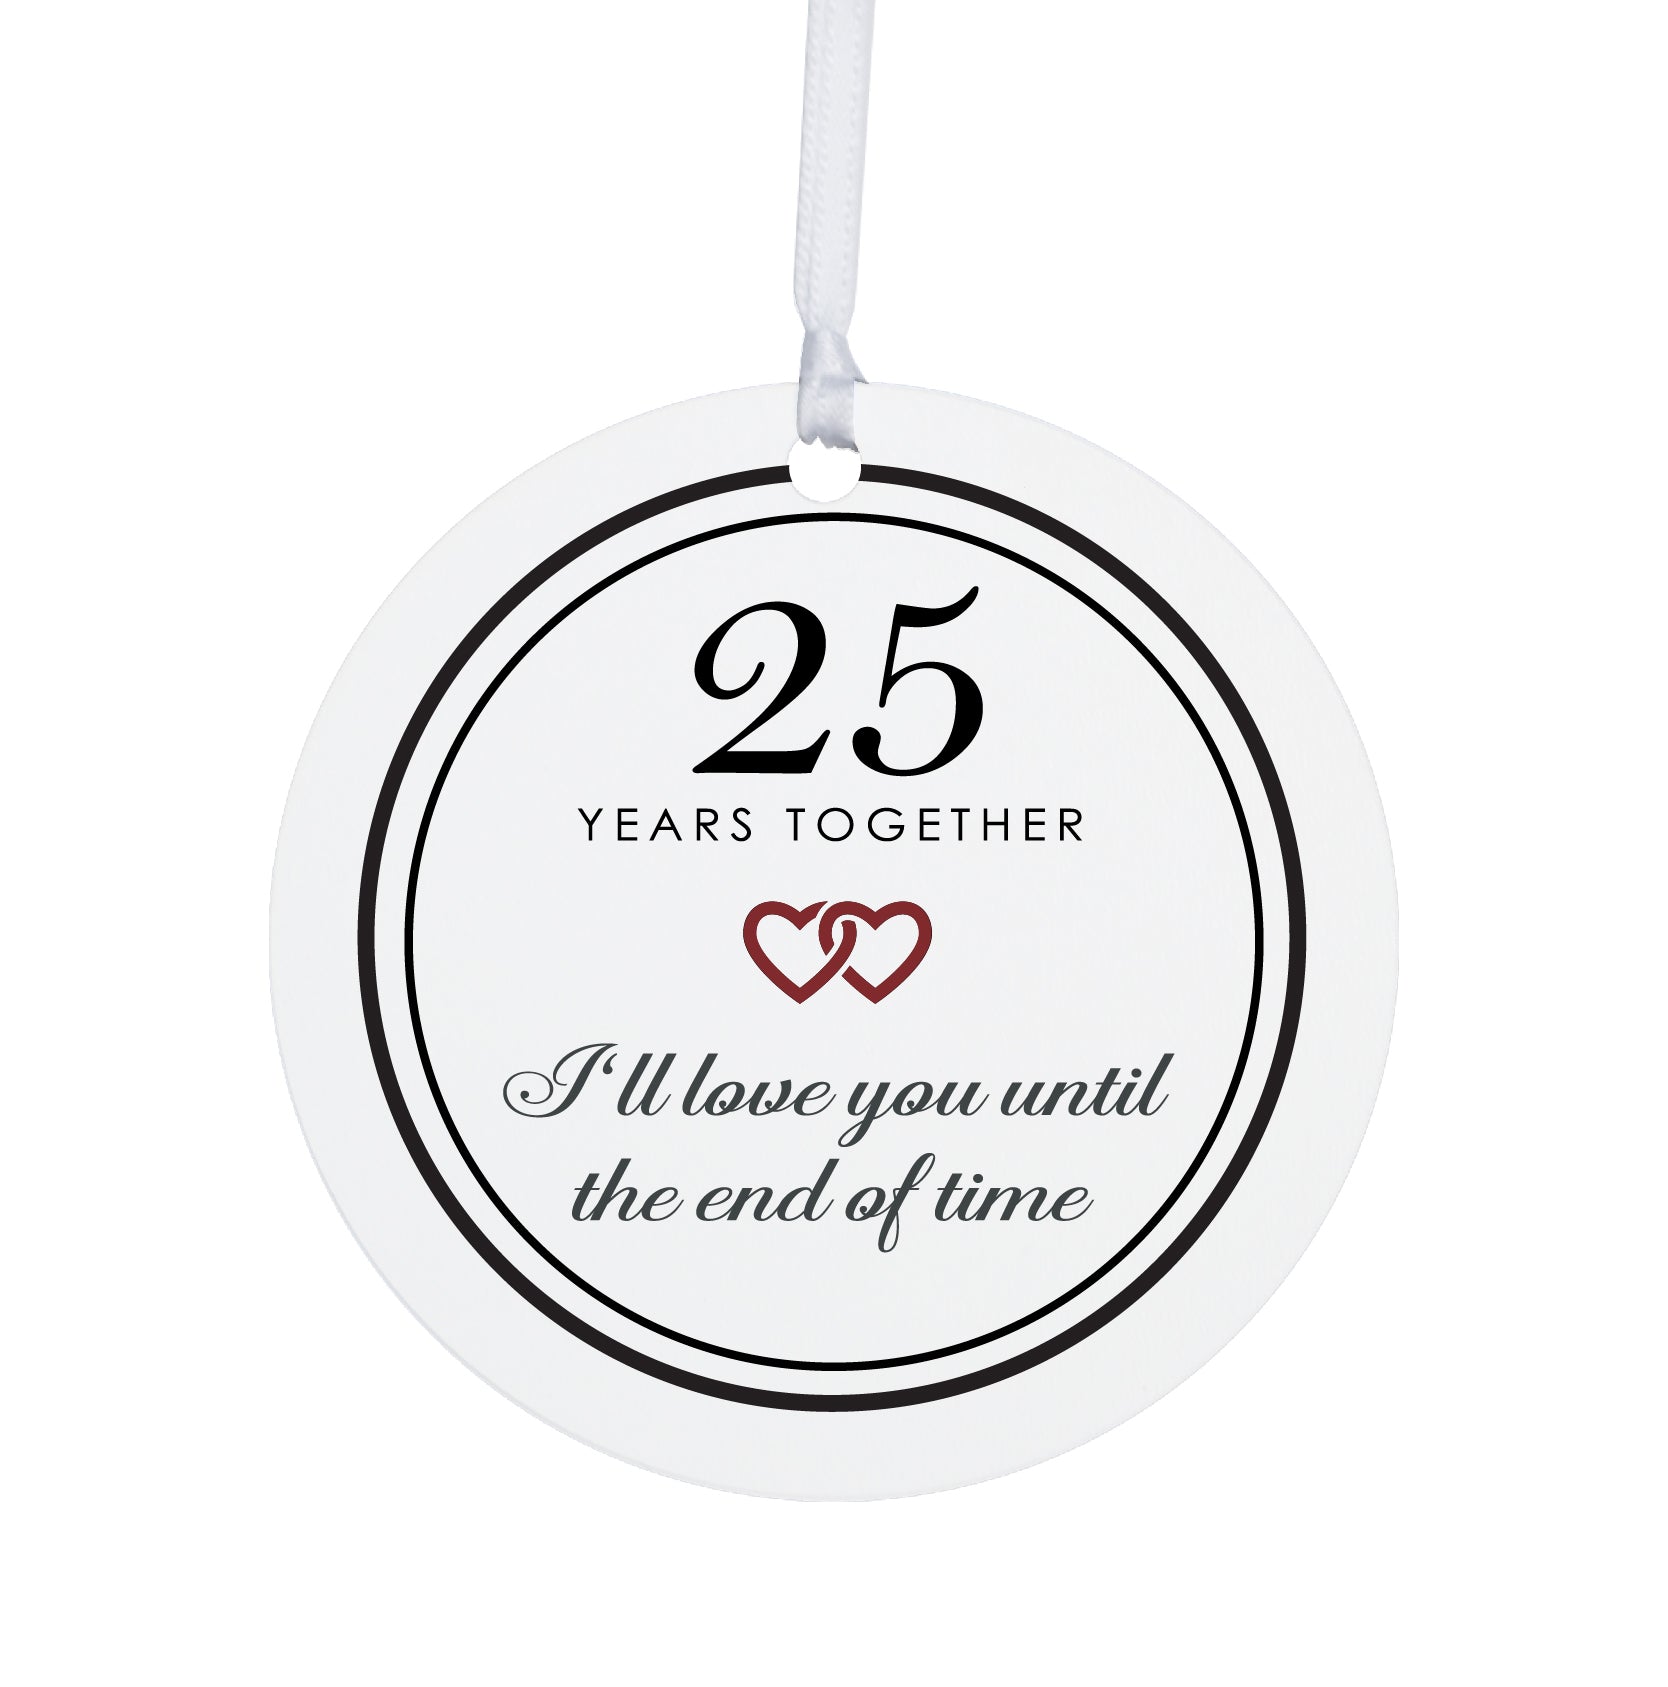 25th Anniversary party ideas For Your Dream Event